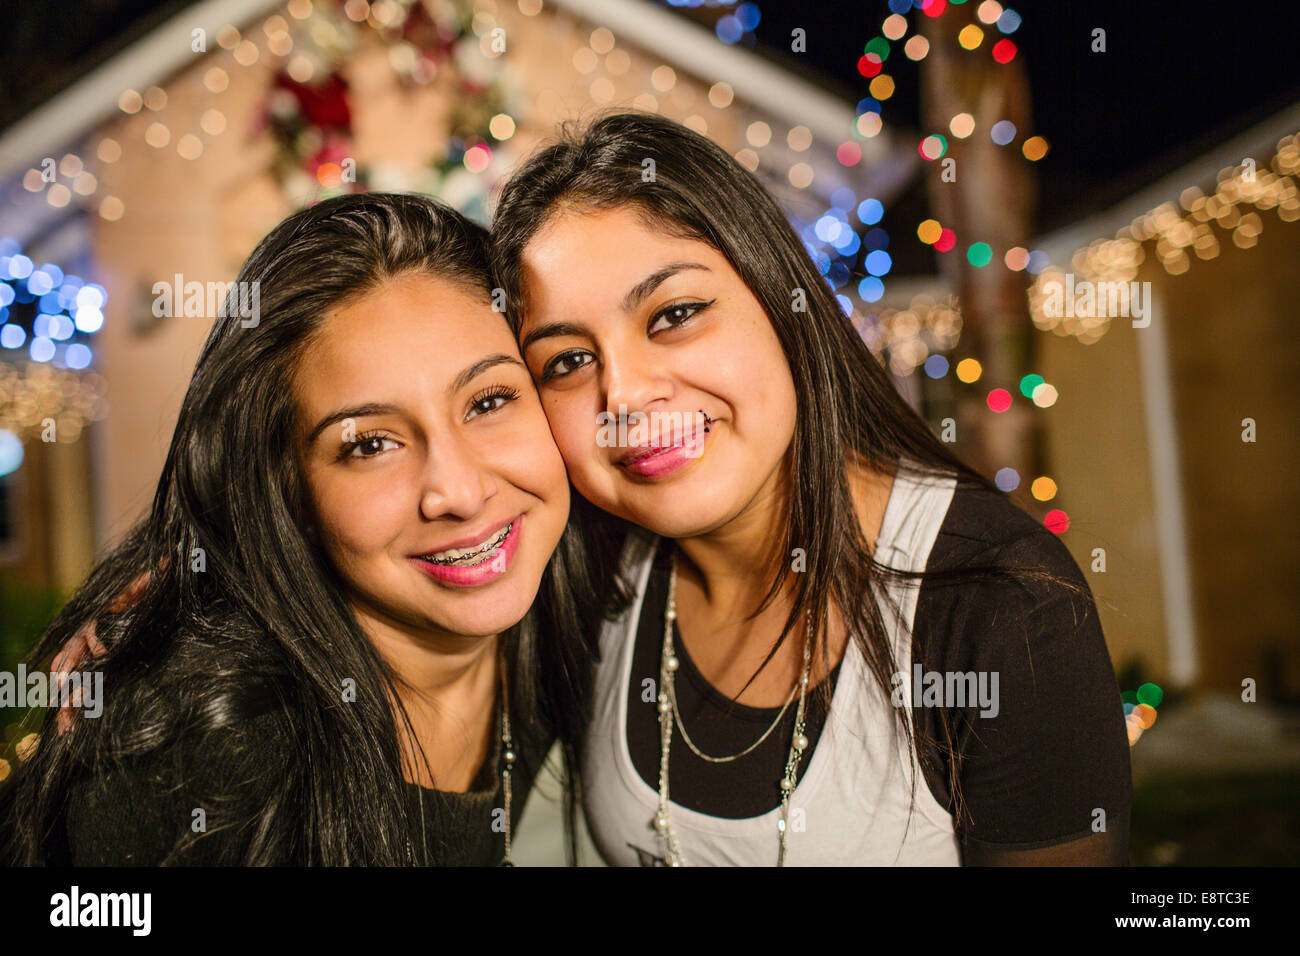 Hispanic sisters smiling outside house decorated with string lights Stock Photo